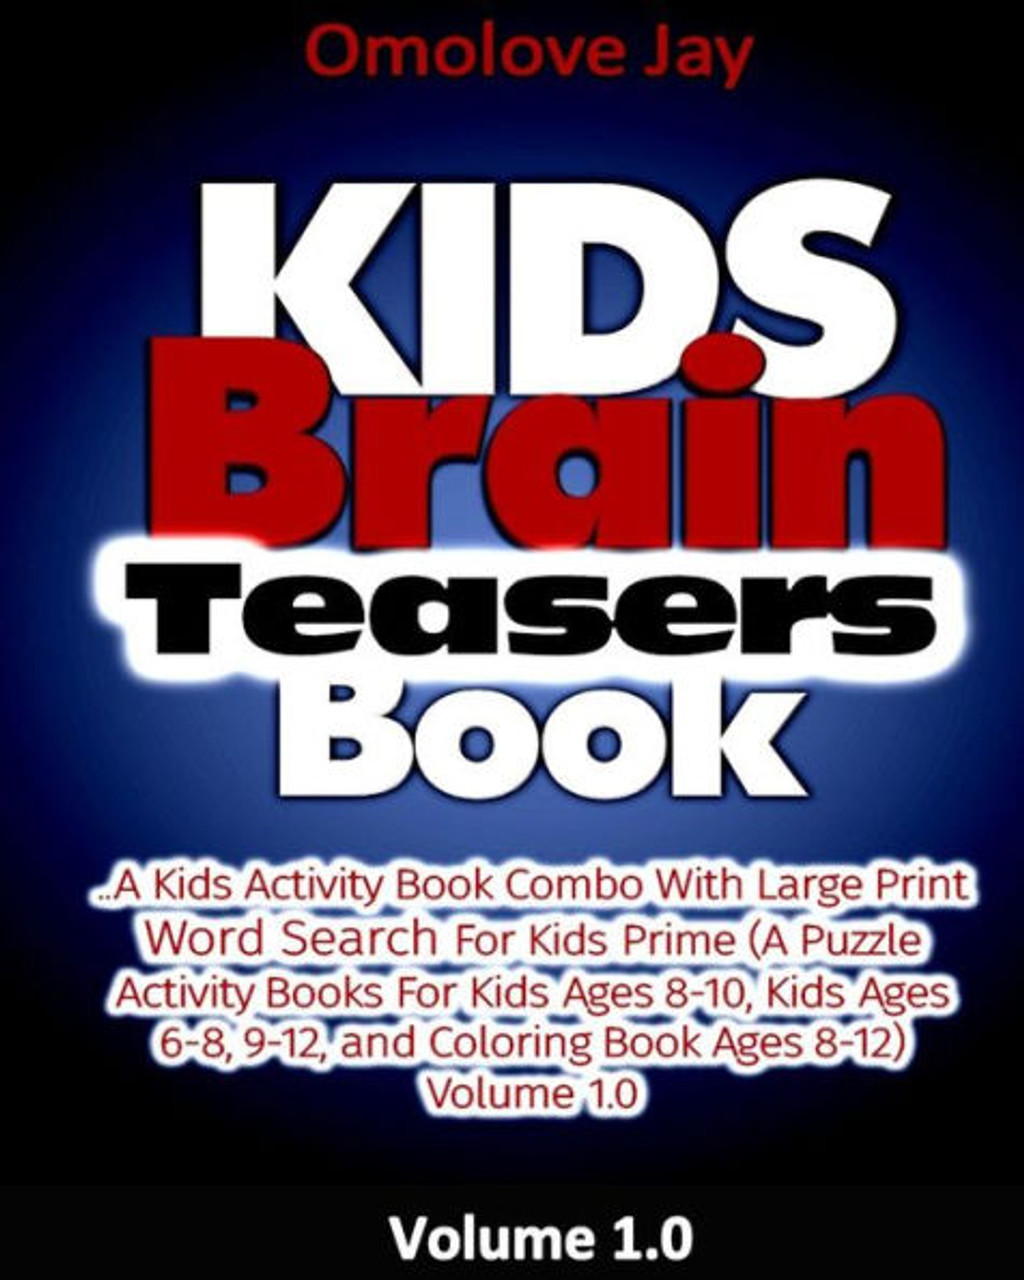 Fun word search puzzles & brain teasers for kids 8-12: Brain games activity  boo